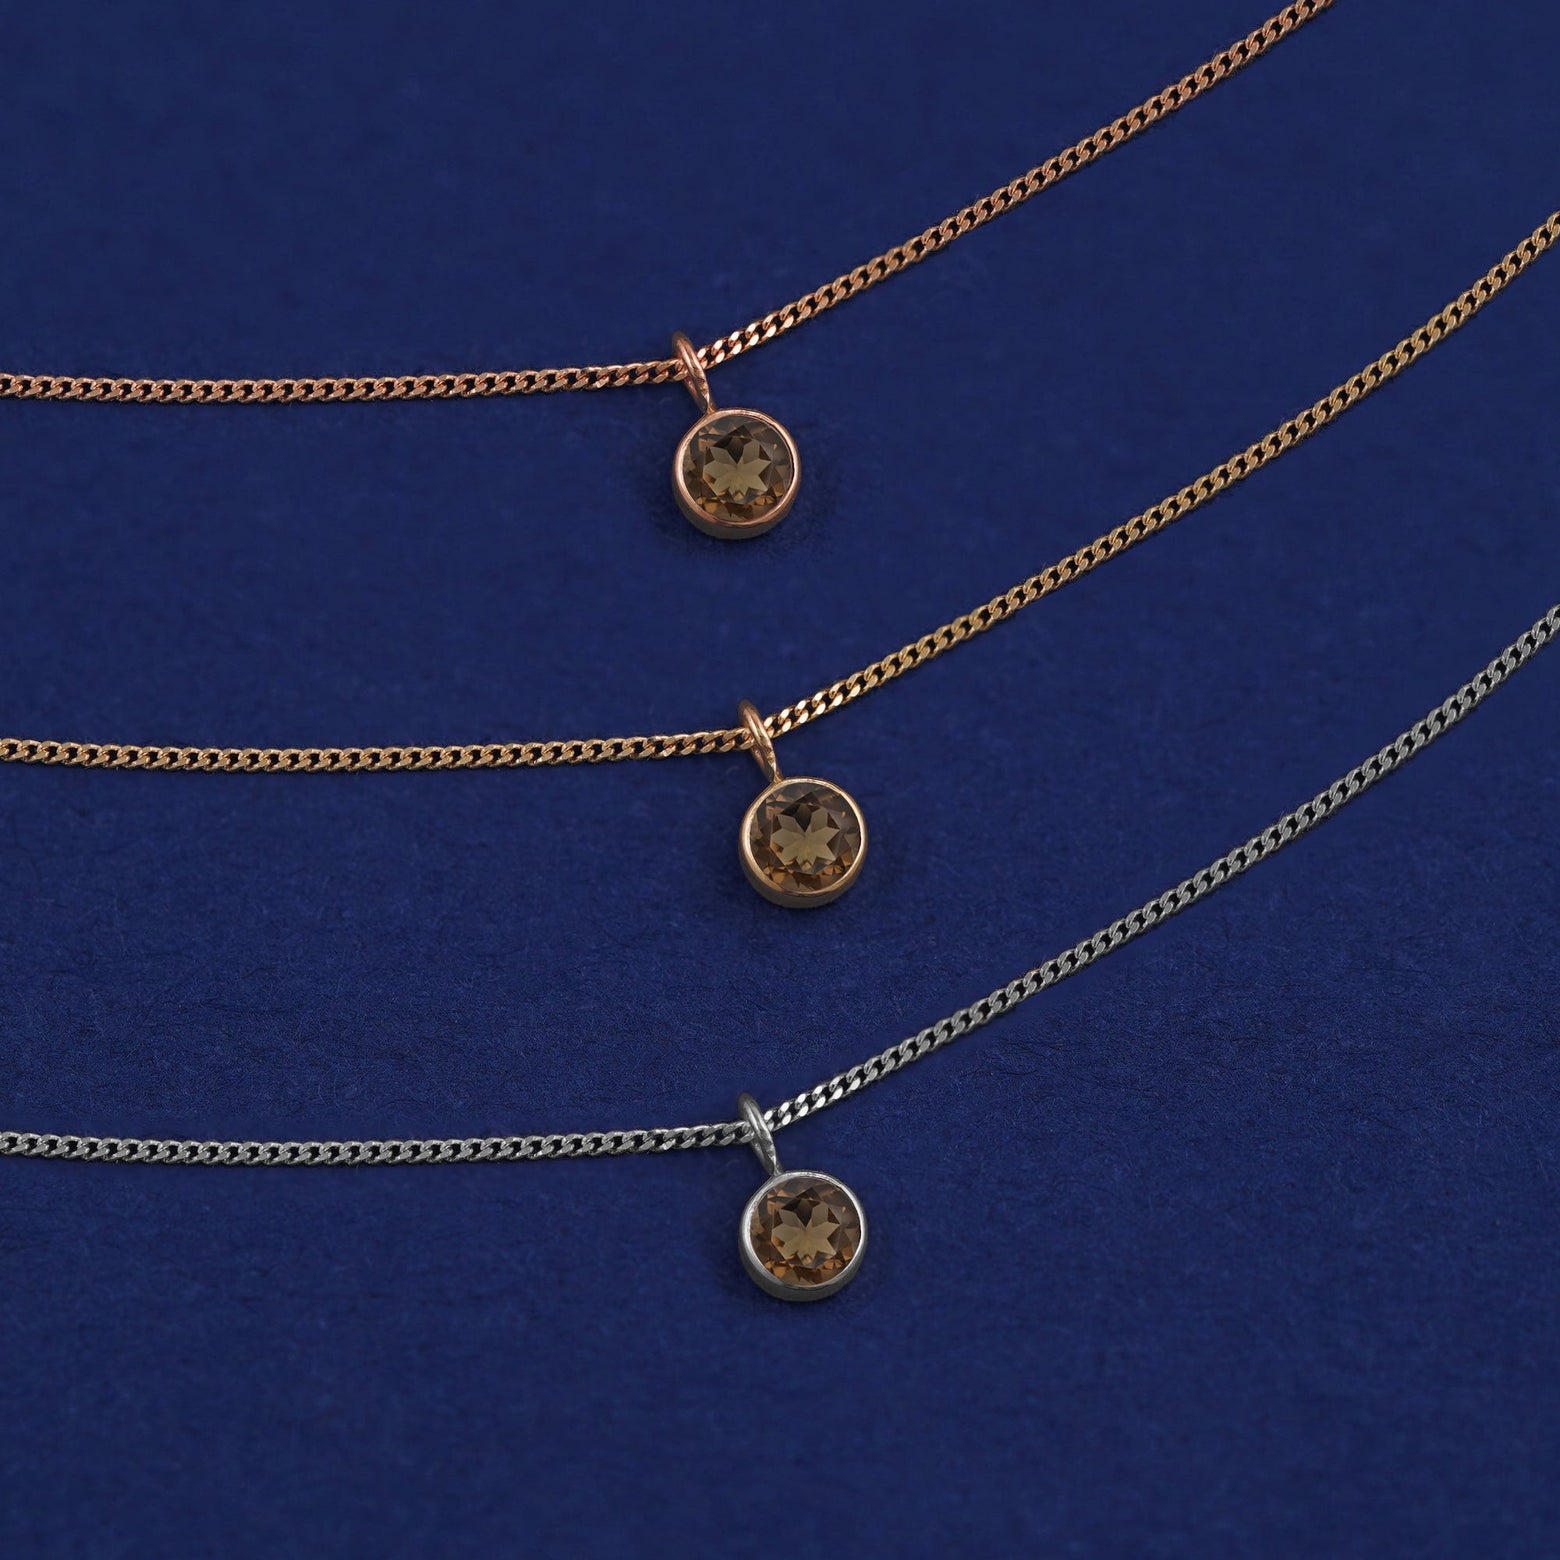 Three versions of the Smoky Quartz Necklace in options of yellow, white, and rose gold on a dark blue background